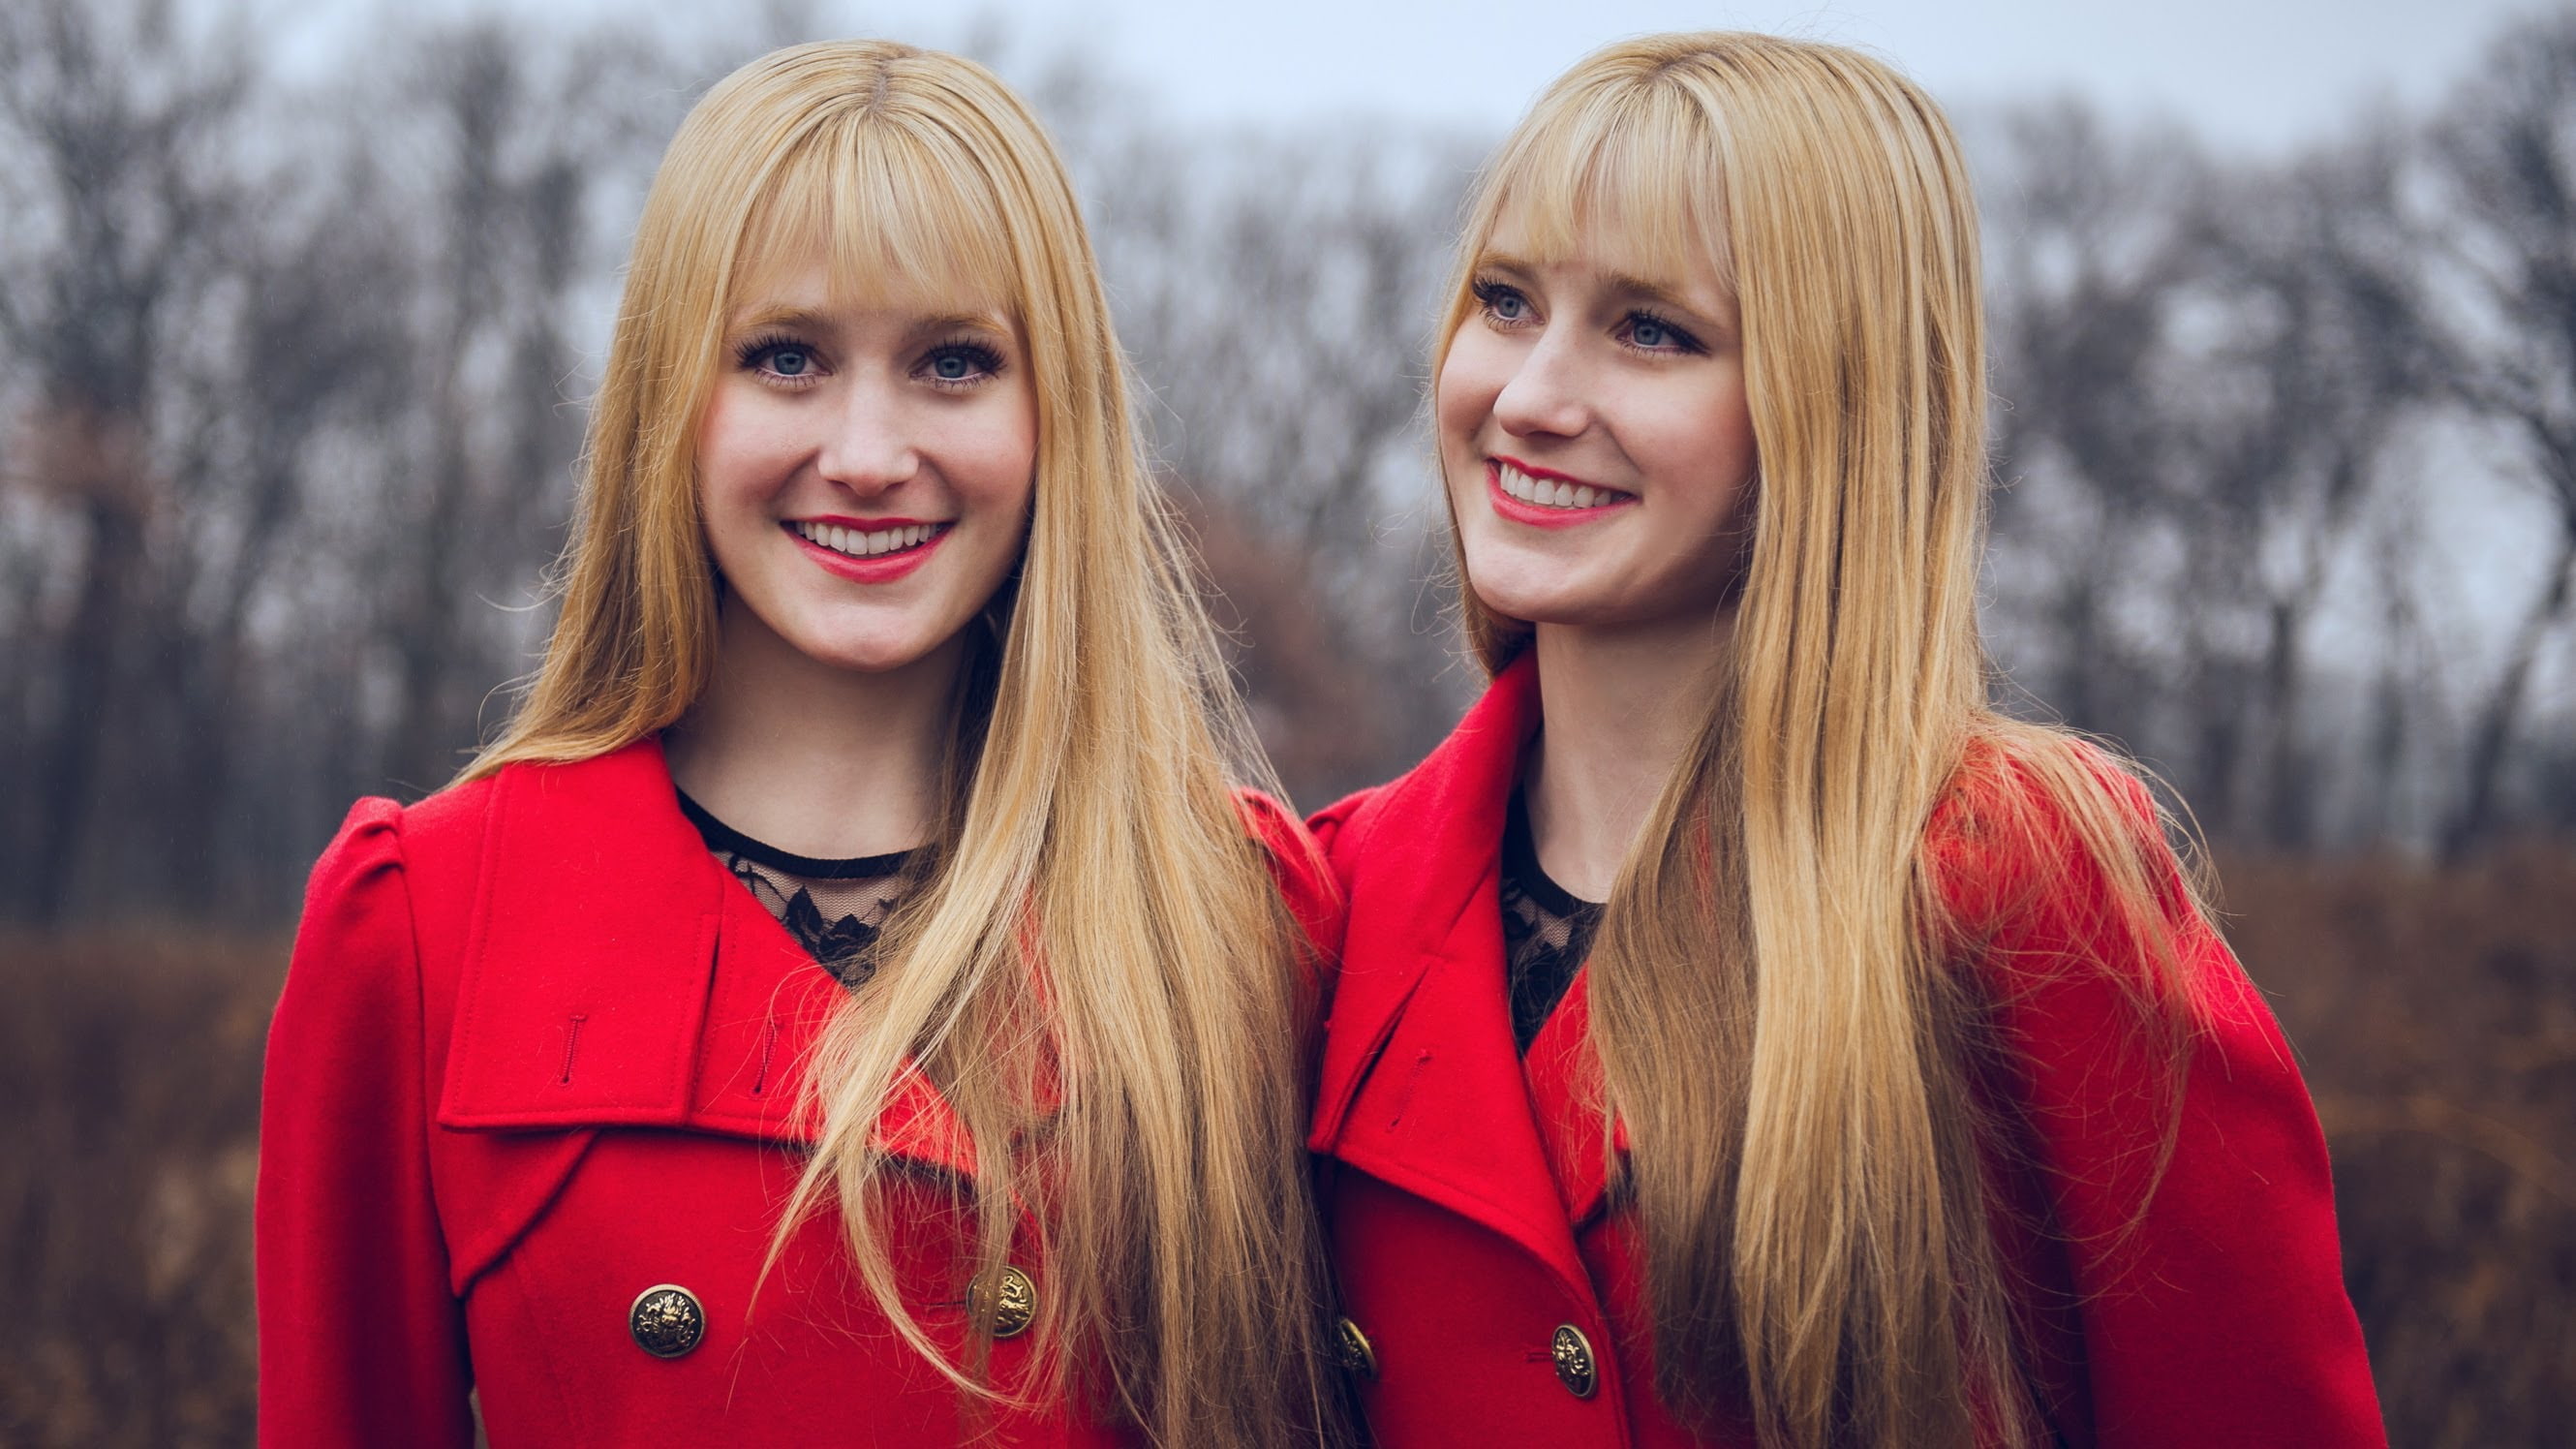 women, musician, Harp Twins, blonde, red coat, smiling, happiness